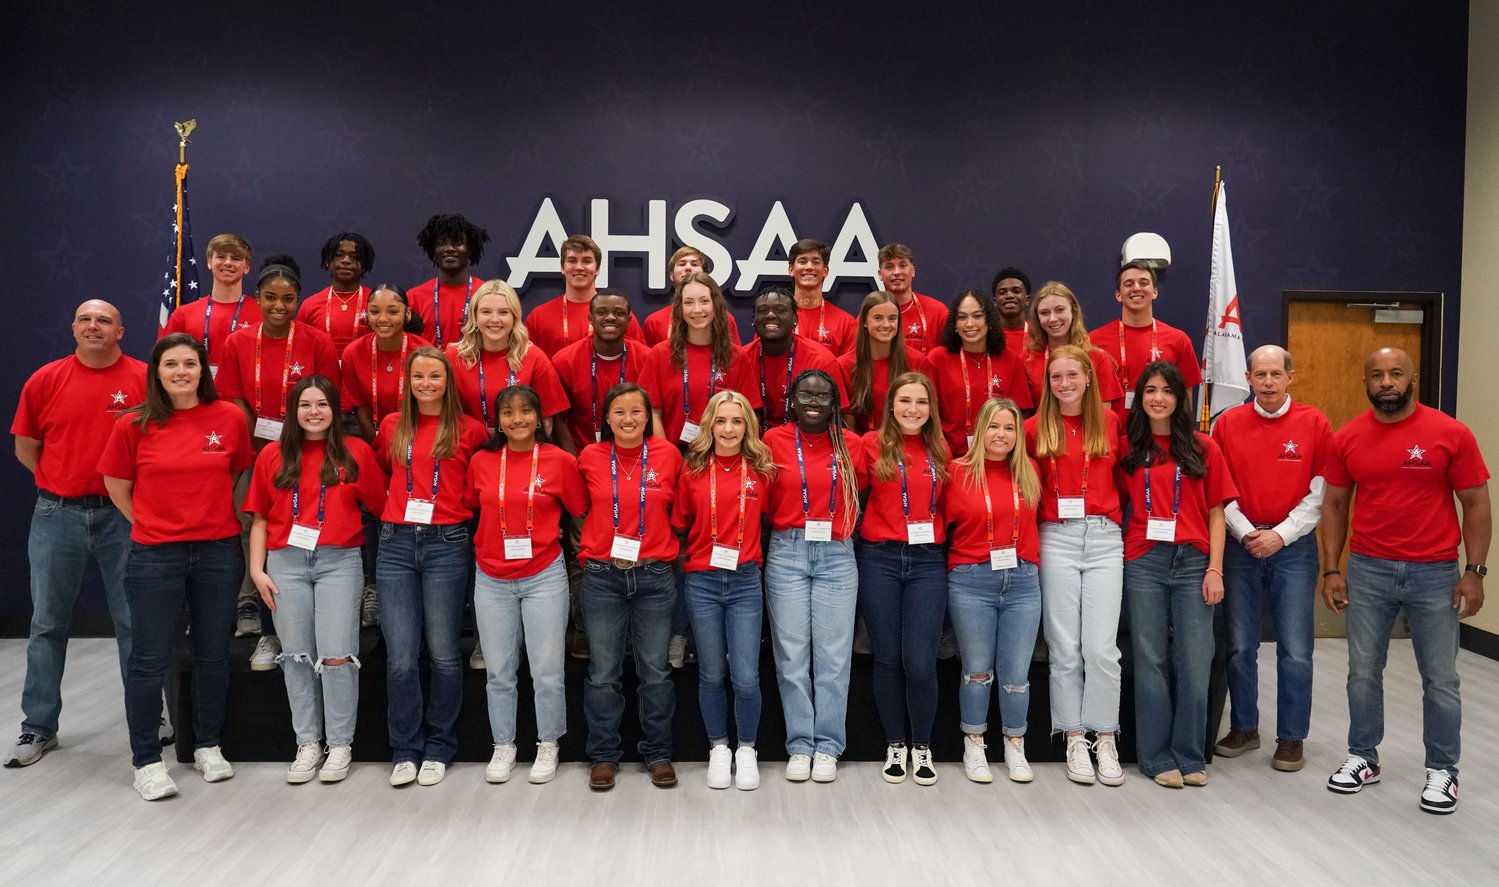 Spanish Fort senior Bailey Hope (first row, third from left) represented the Toro volleyball program at the Alabama High School Athletic Association’s annual Student Leadership Conference last week. It was Hope’s second consecutive year participating in the event.